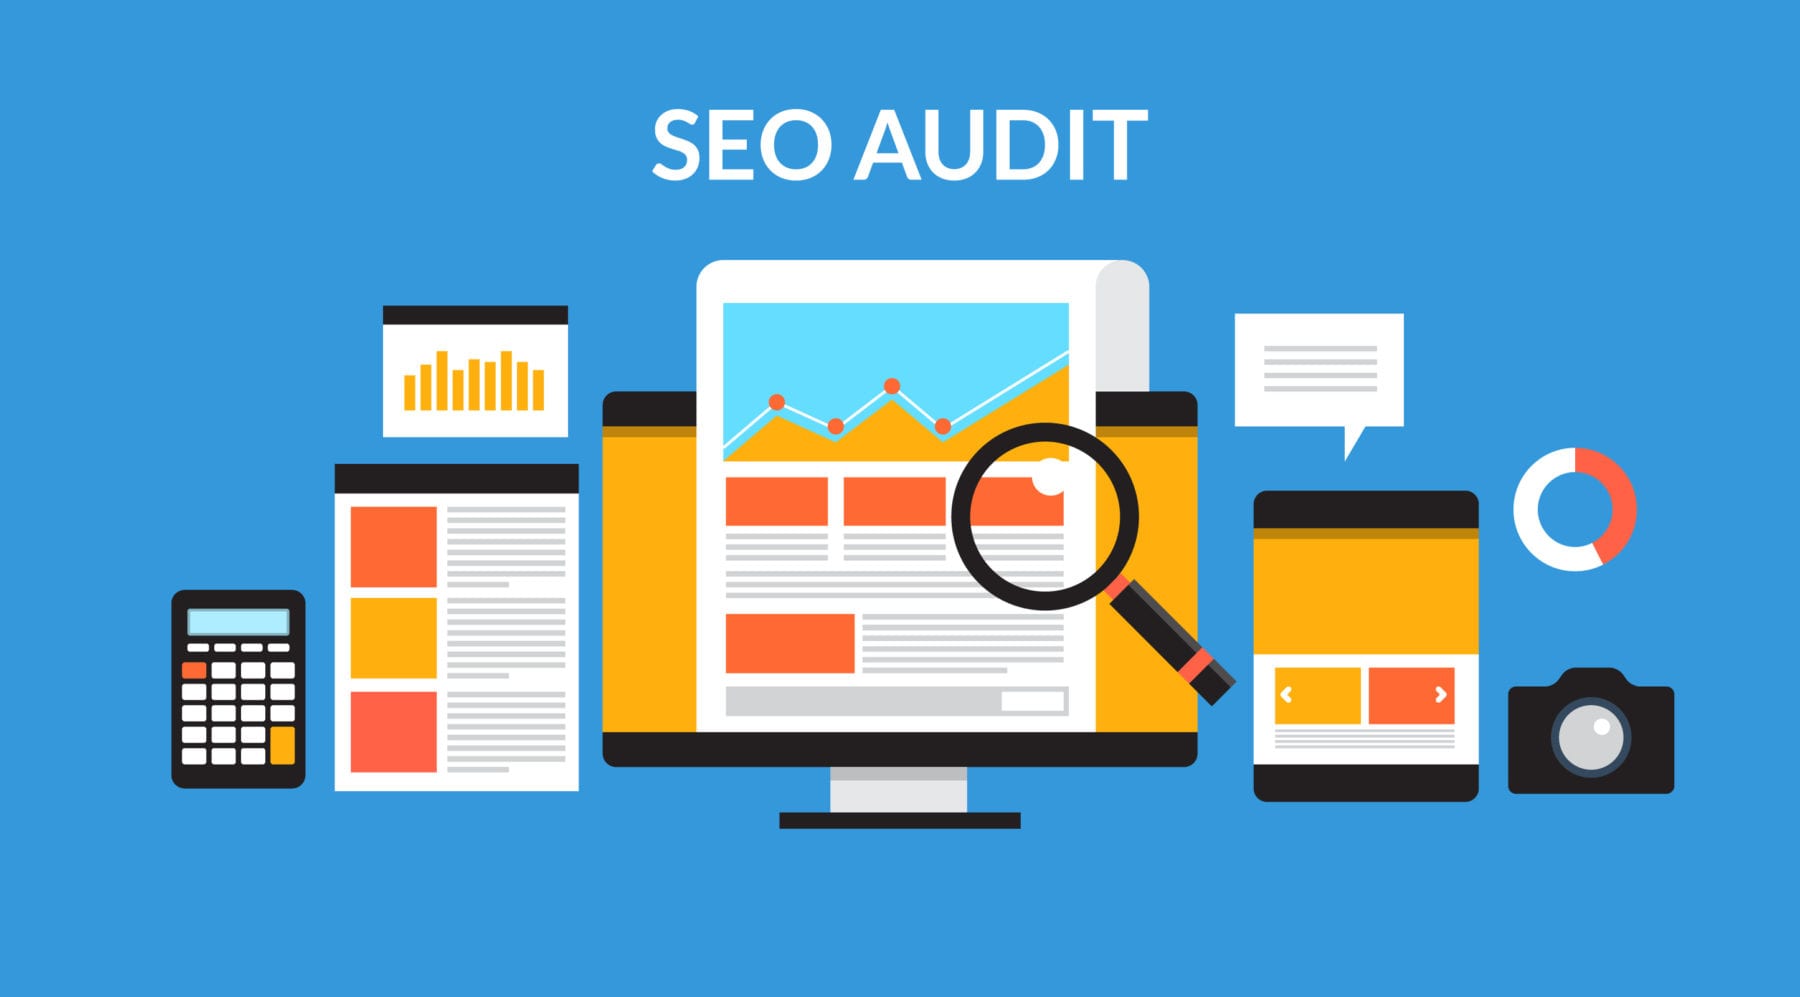 Generate a Quick SEO Audit Report of Your Website